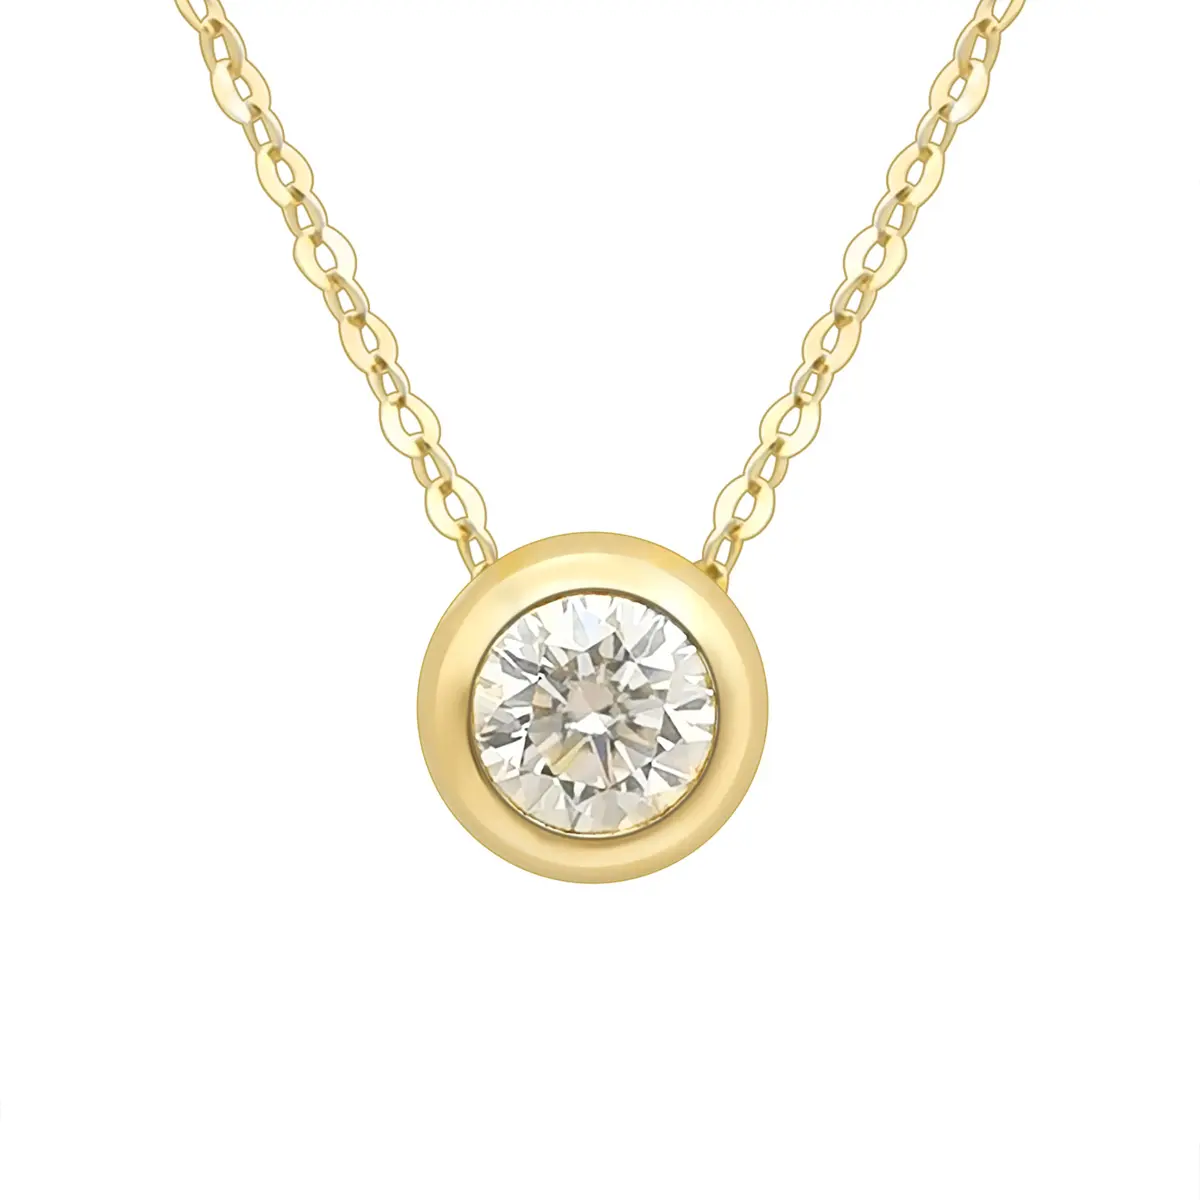 18 18k Real Gold With MoissaniteペンダントNecklace Clover Jewelry 18K Yellow Gold Classic Jewelry Necklace Women Wholesale